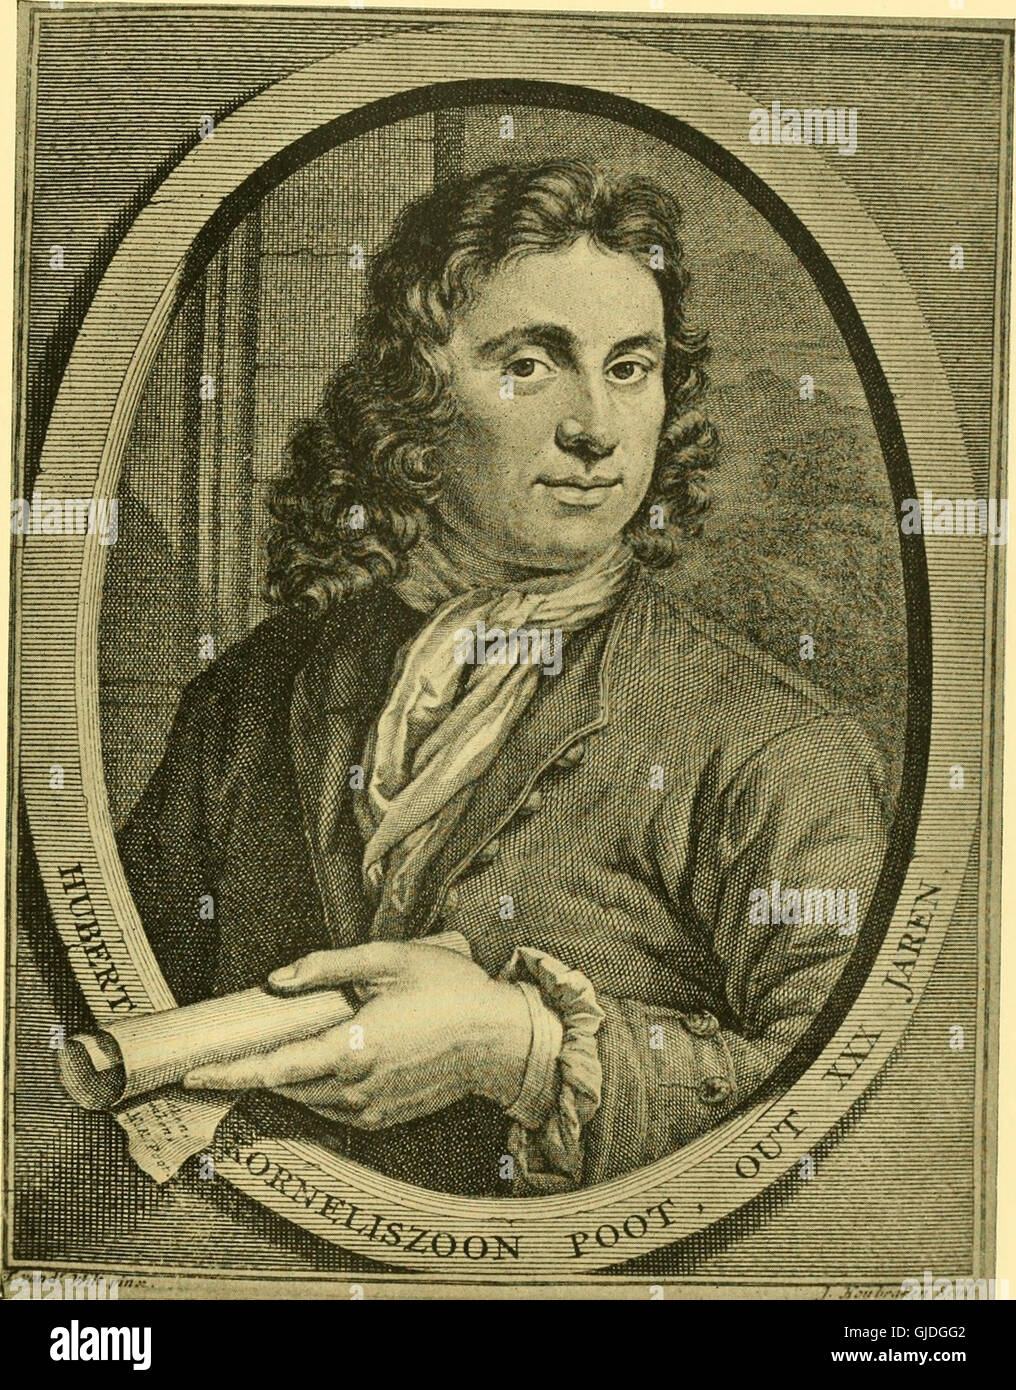 Antony van Leeuwenhoek and his 'Little animals'; being some account of the father of protozoology and bacteriology and his multifarious discoveries in these disciplines; (1932) Stock Photo